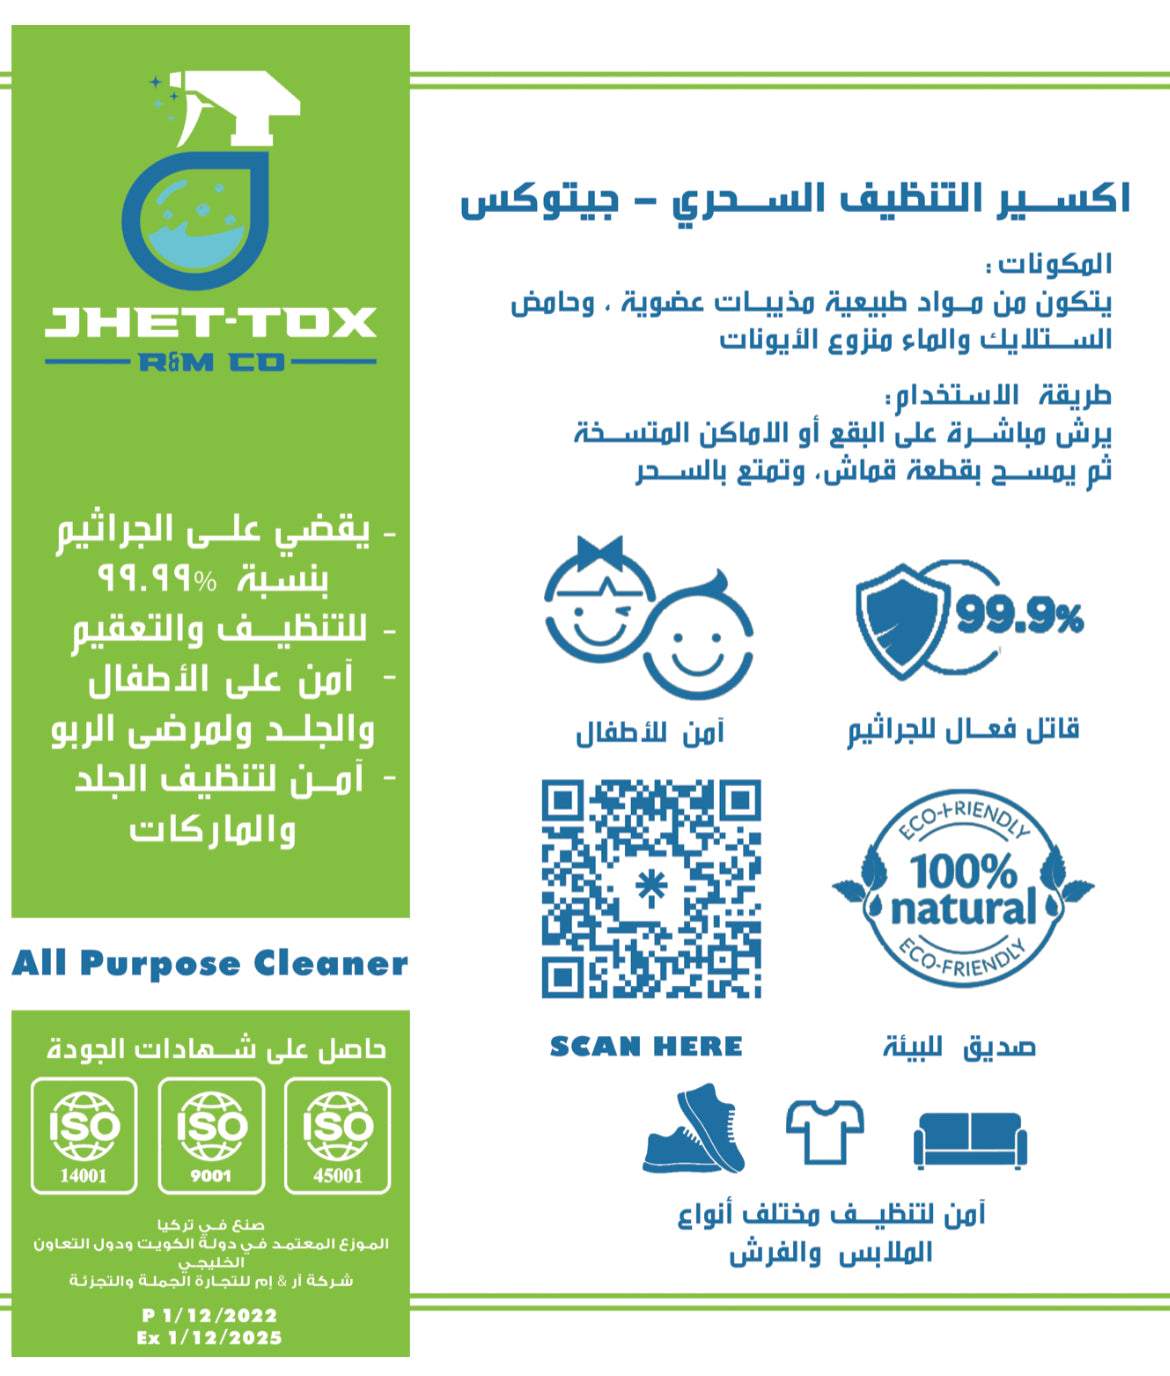 Magic cleaner - 100mL - Cleaner from [store] by JHET.TOX - CLEANER, JHET.TOX